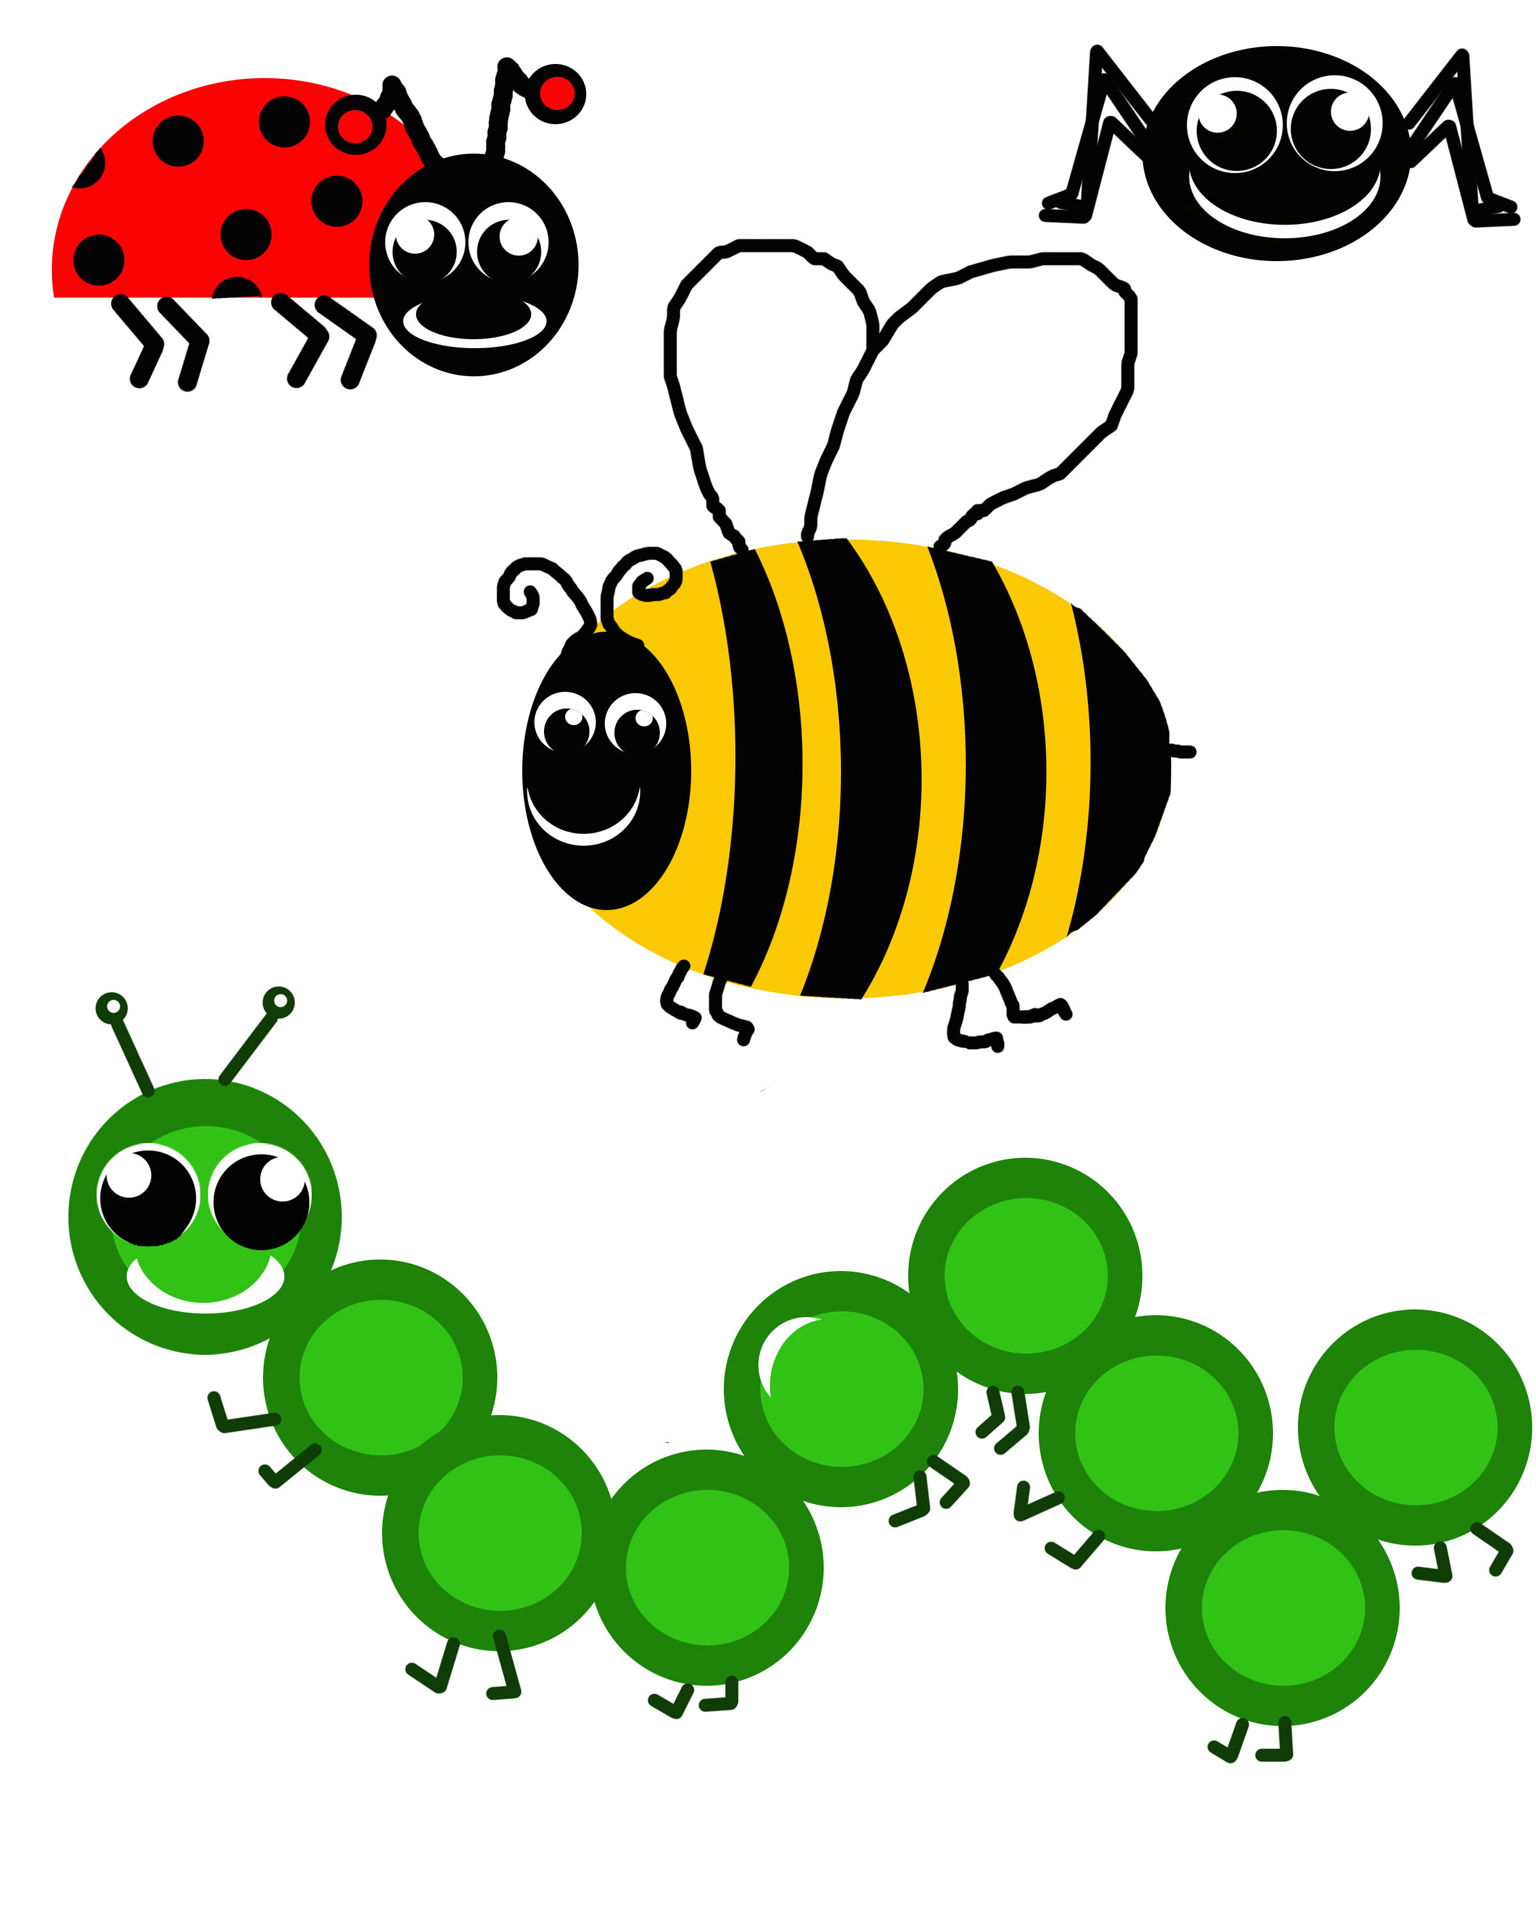 Insect clipart 3 image